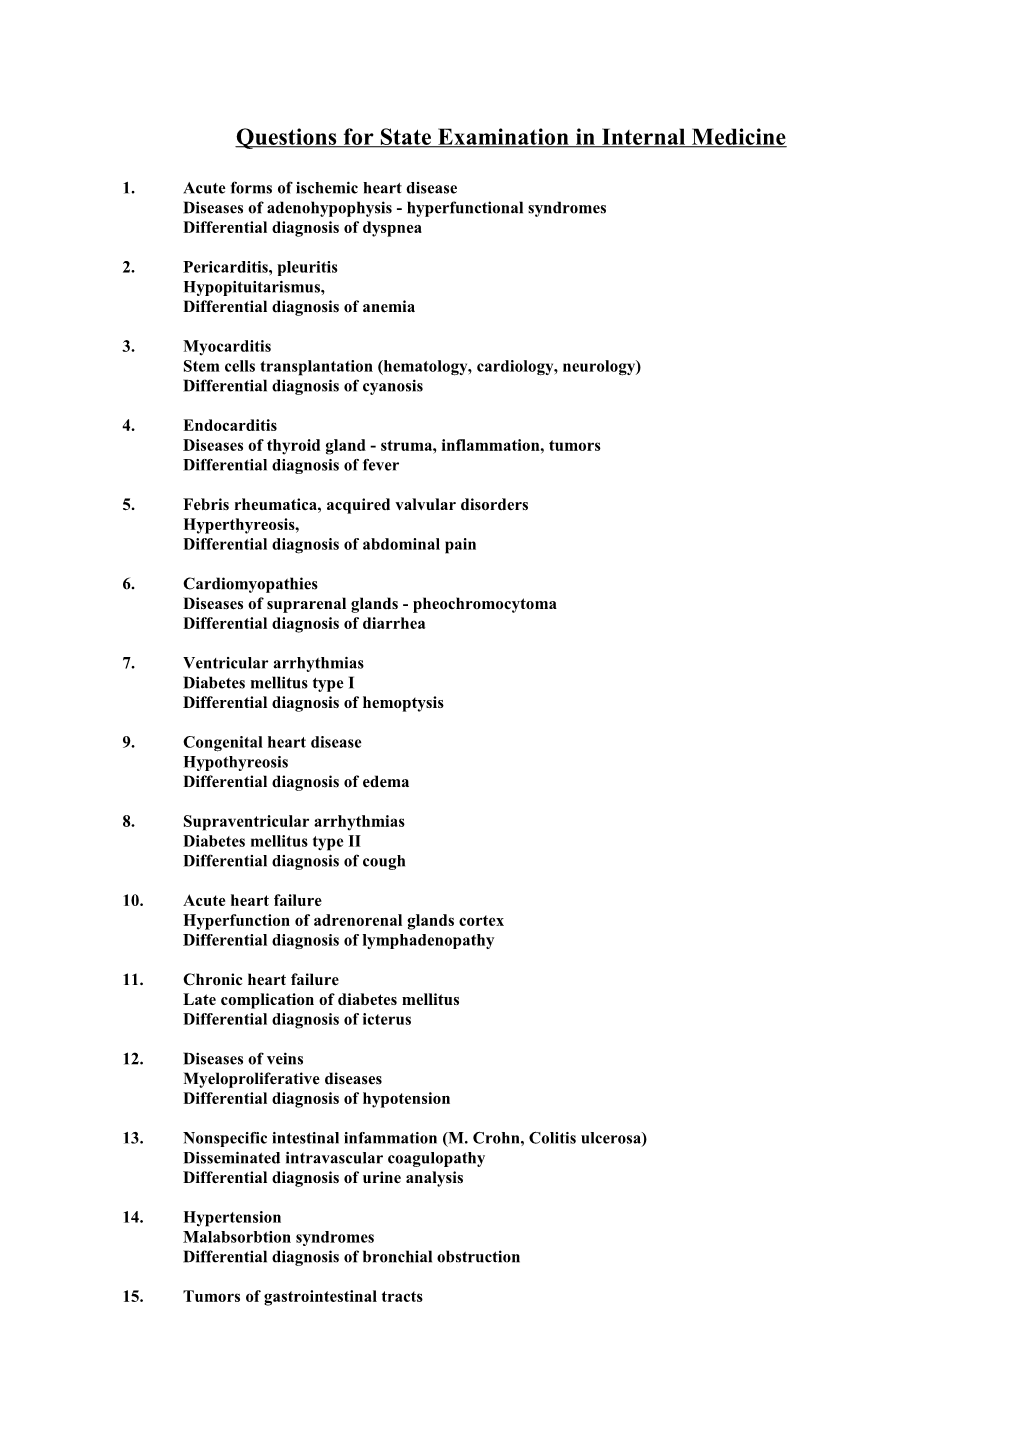 Questions for State Examination in Internal Medicine